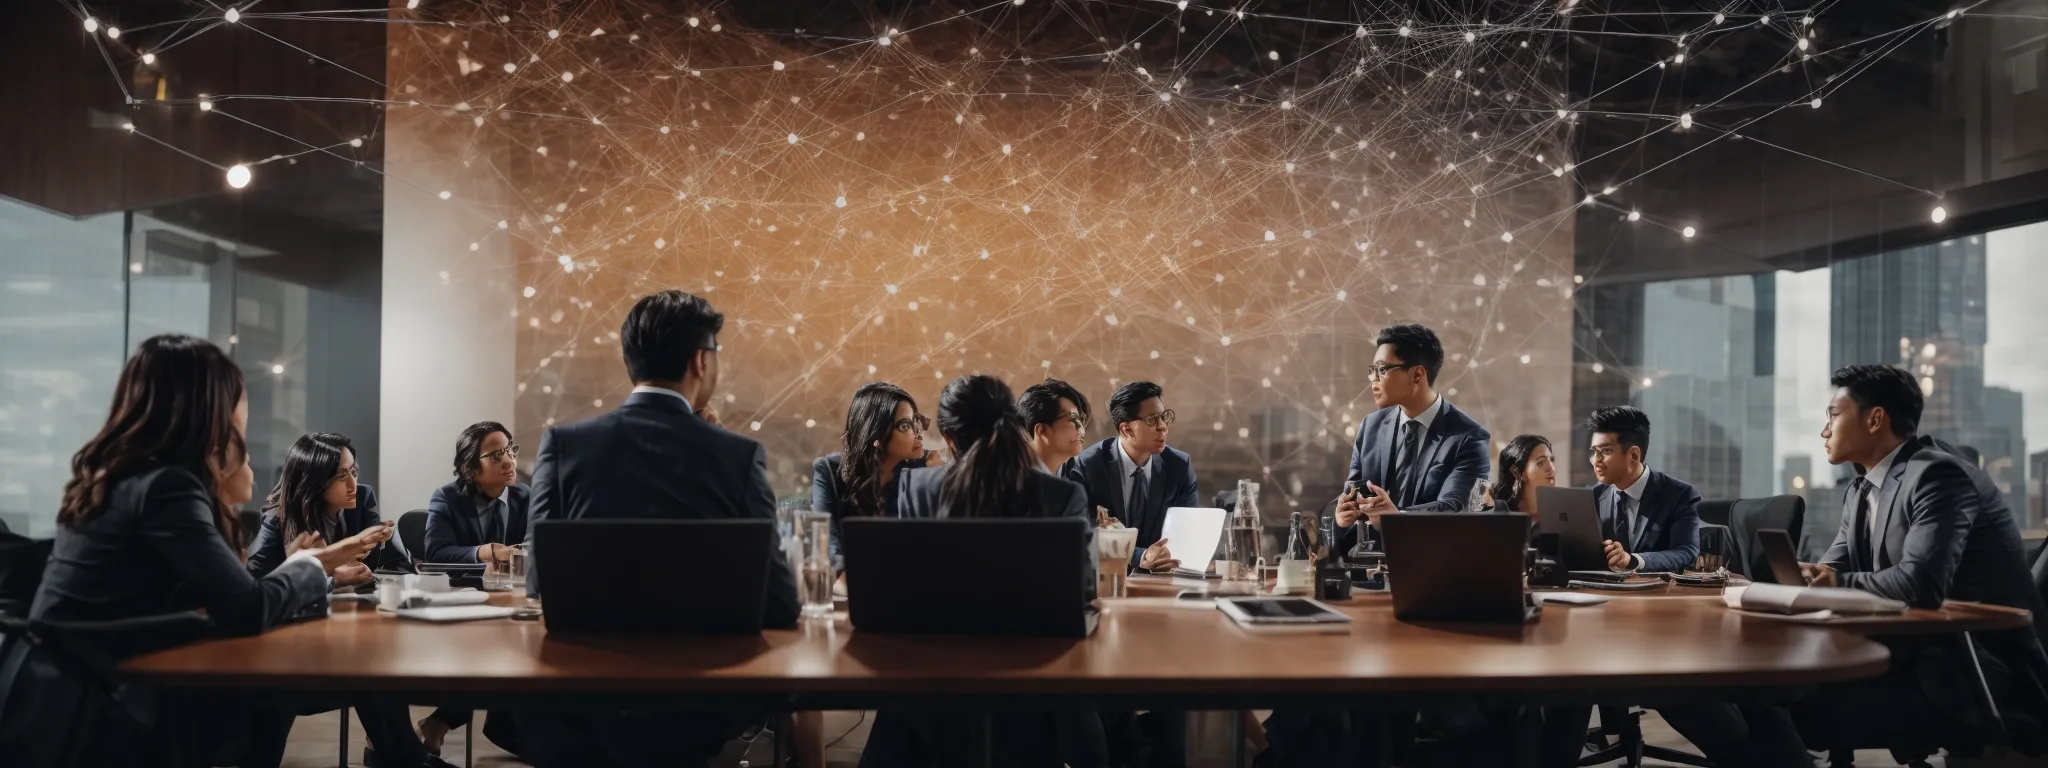 a digital marketing team discusses strategies around a conference table with a backdrop of social media icons and a web of interconnected nodes symbolizing a network.